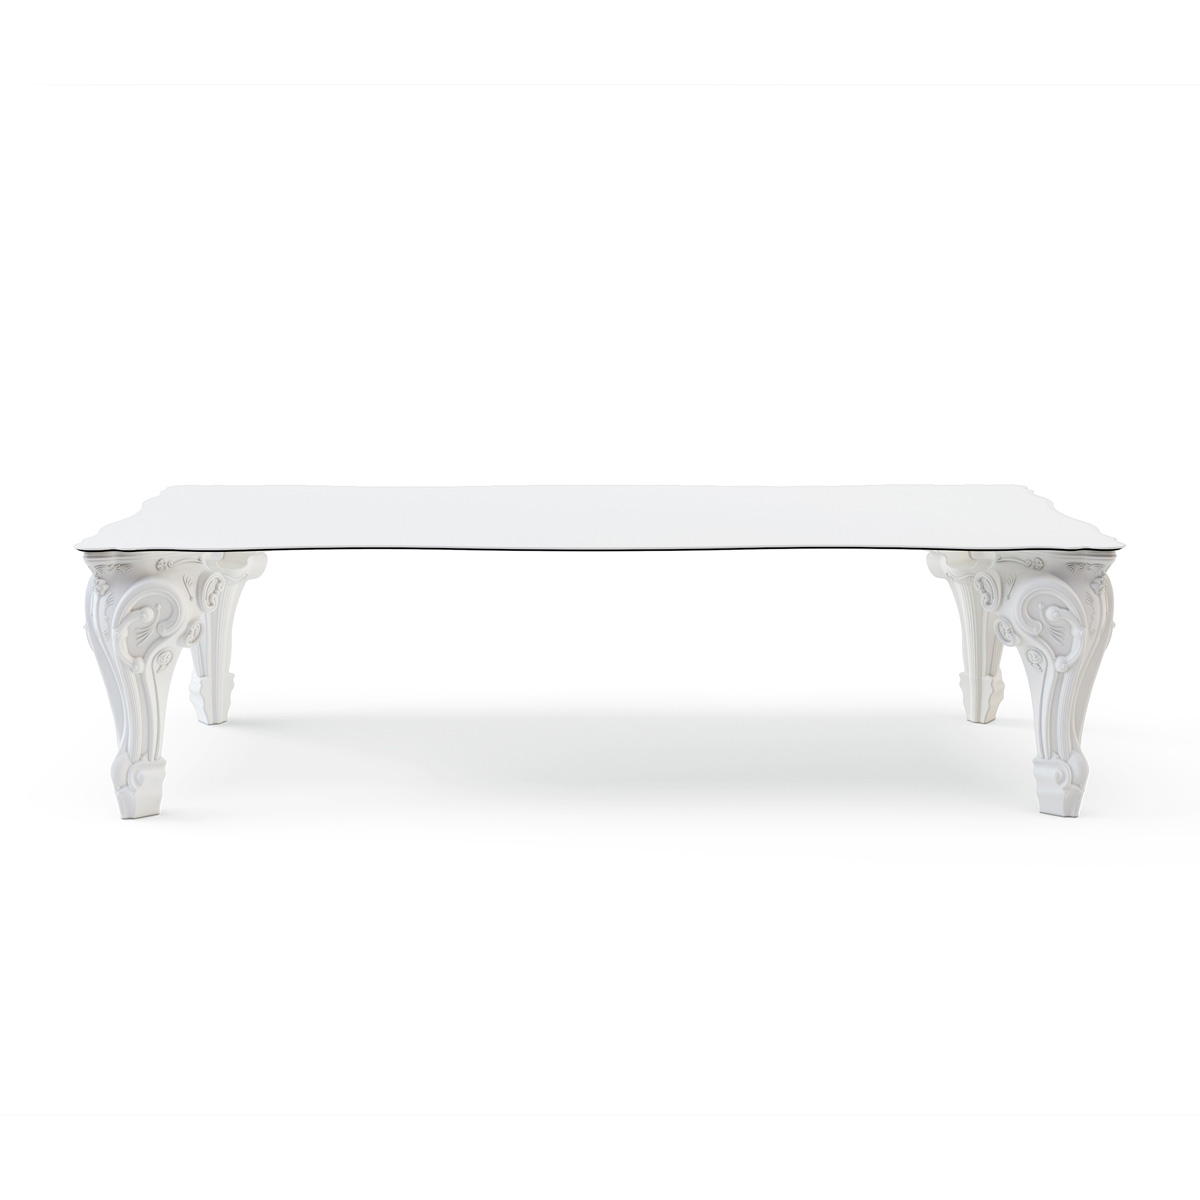 Sir of Love dining table from Slide